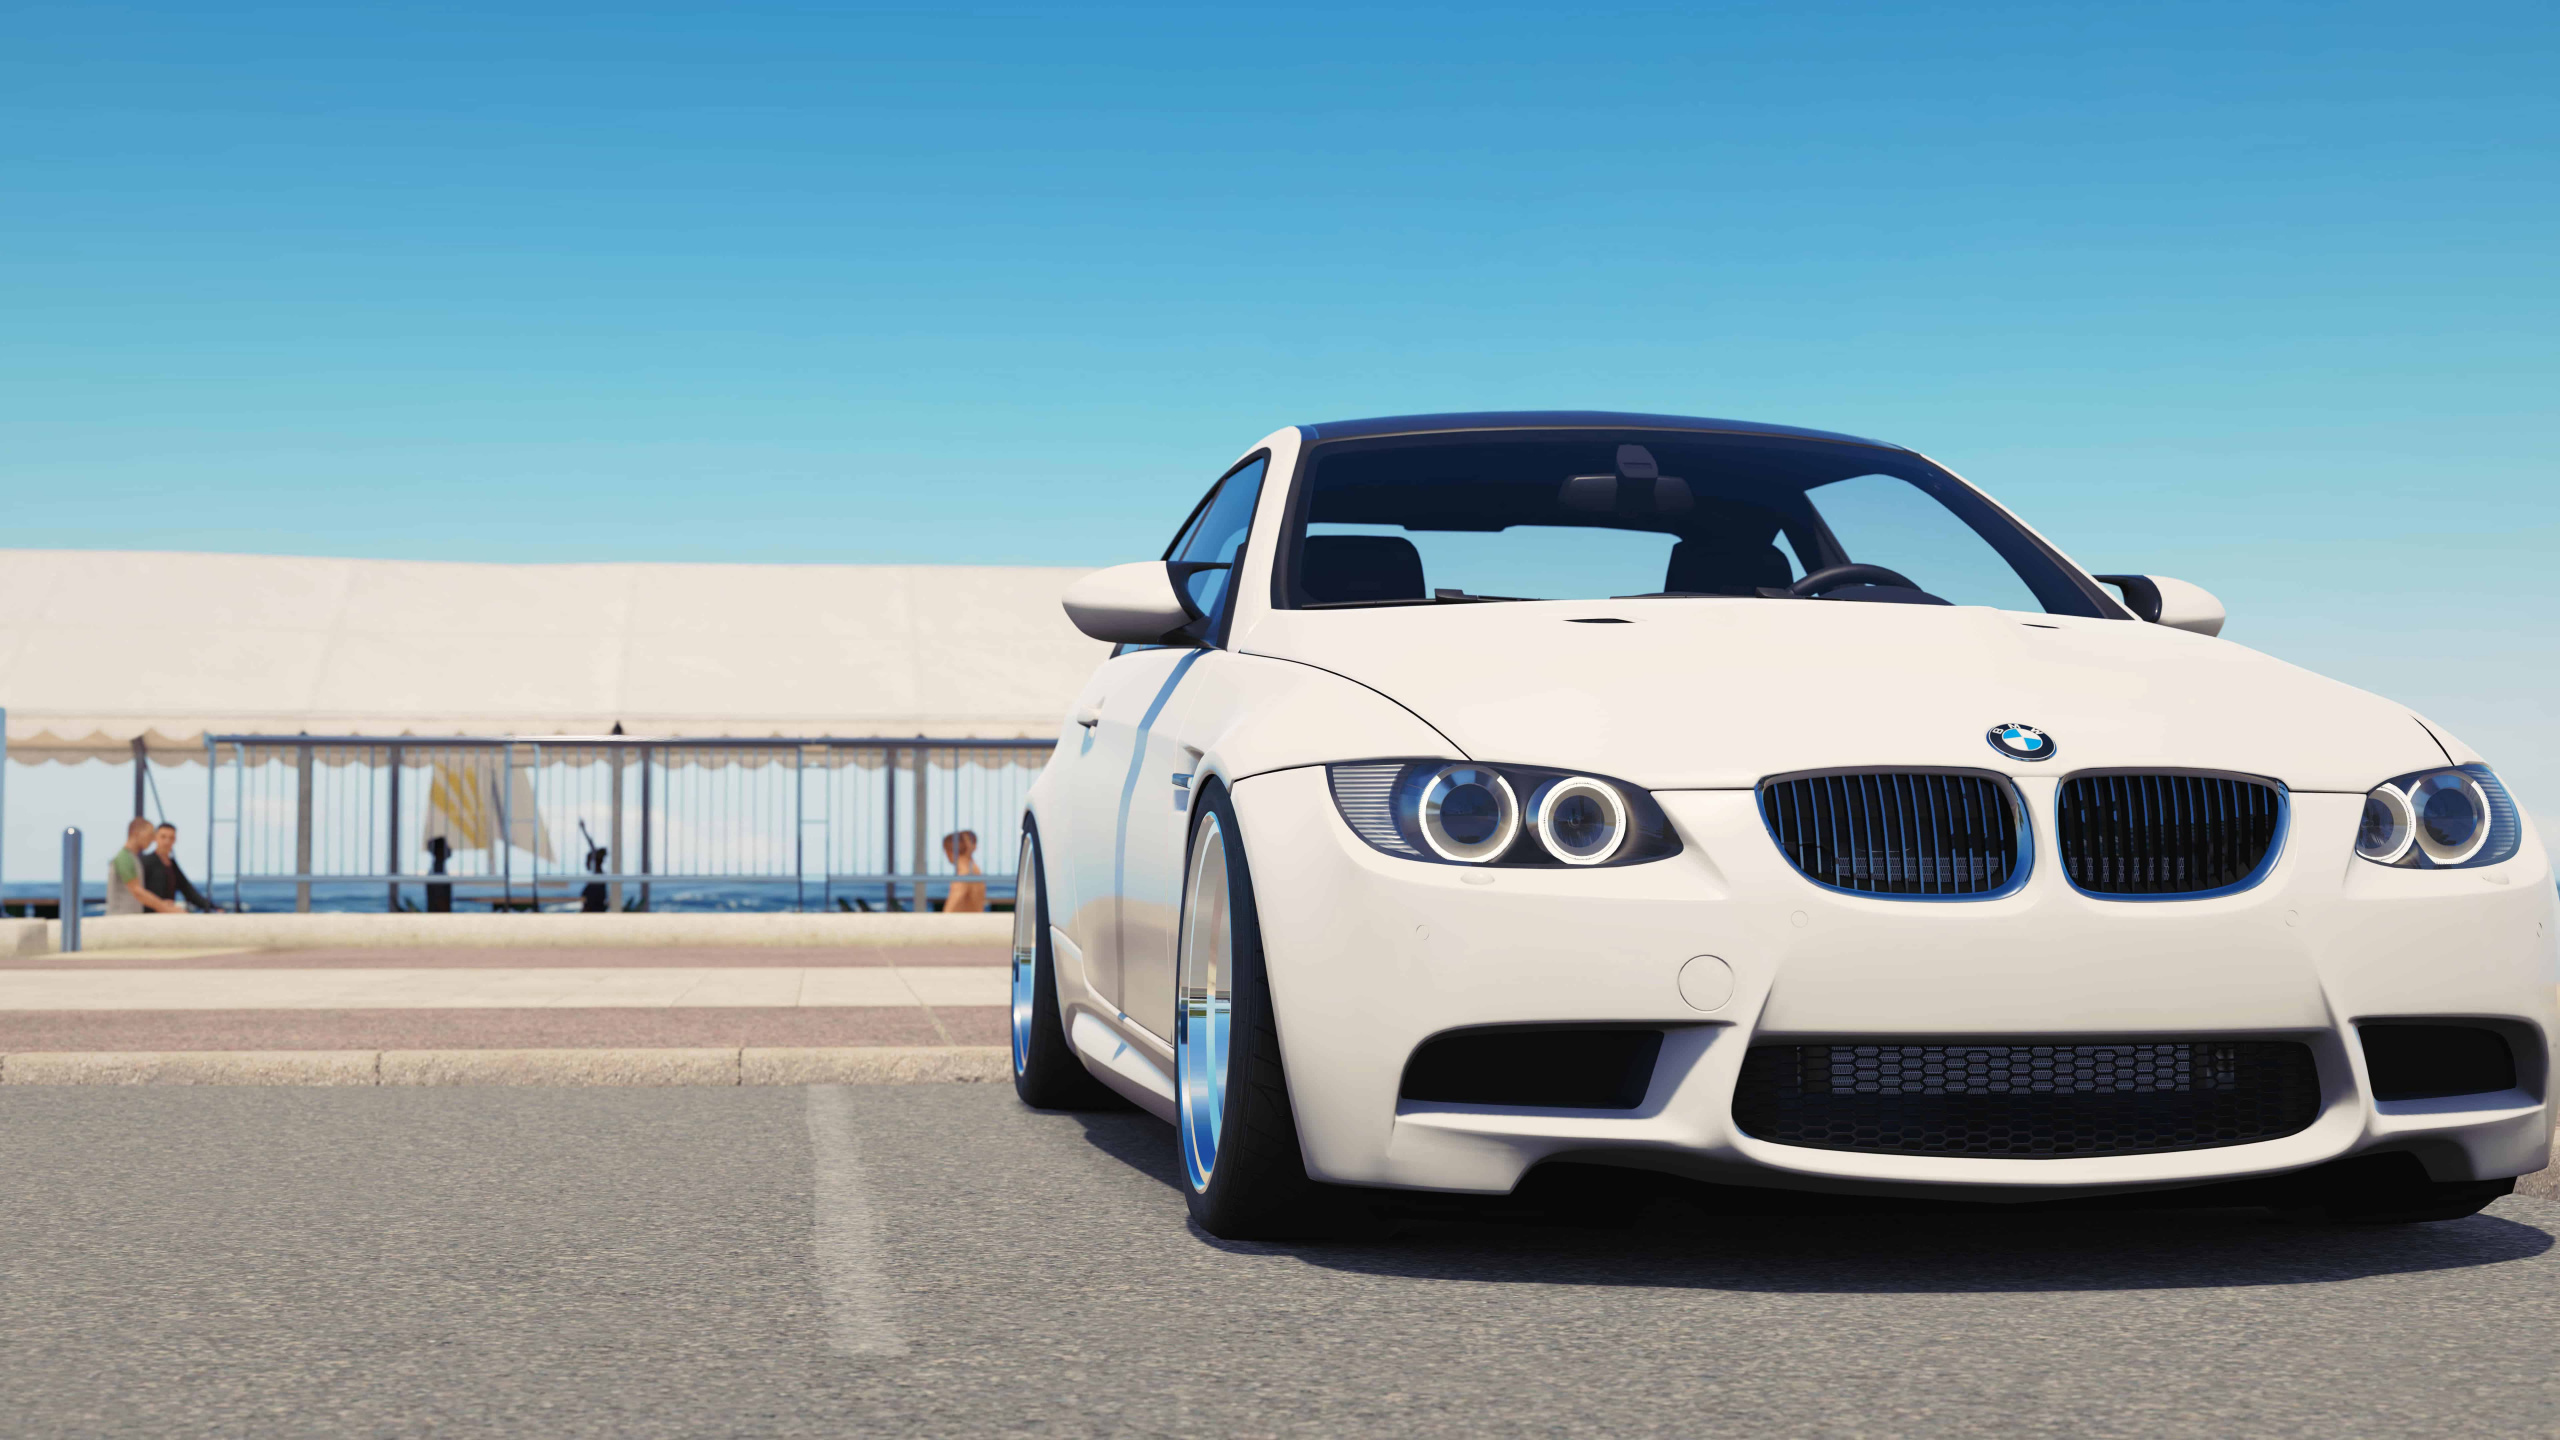 White Bmw m 3 Coupe Parked on Gray Asphalt Road During Daytime. Wallpaper in 2560x1440 Resolution